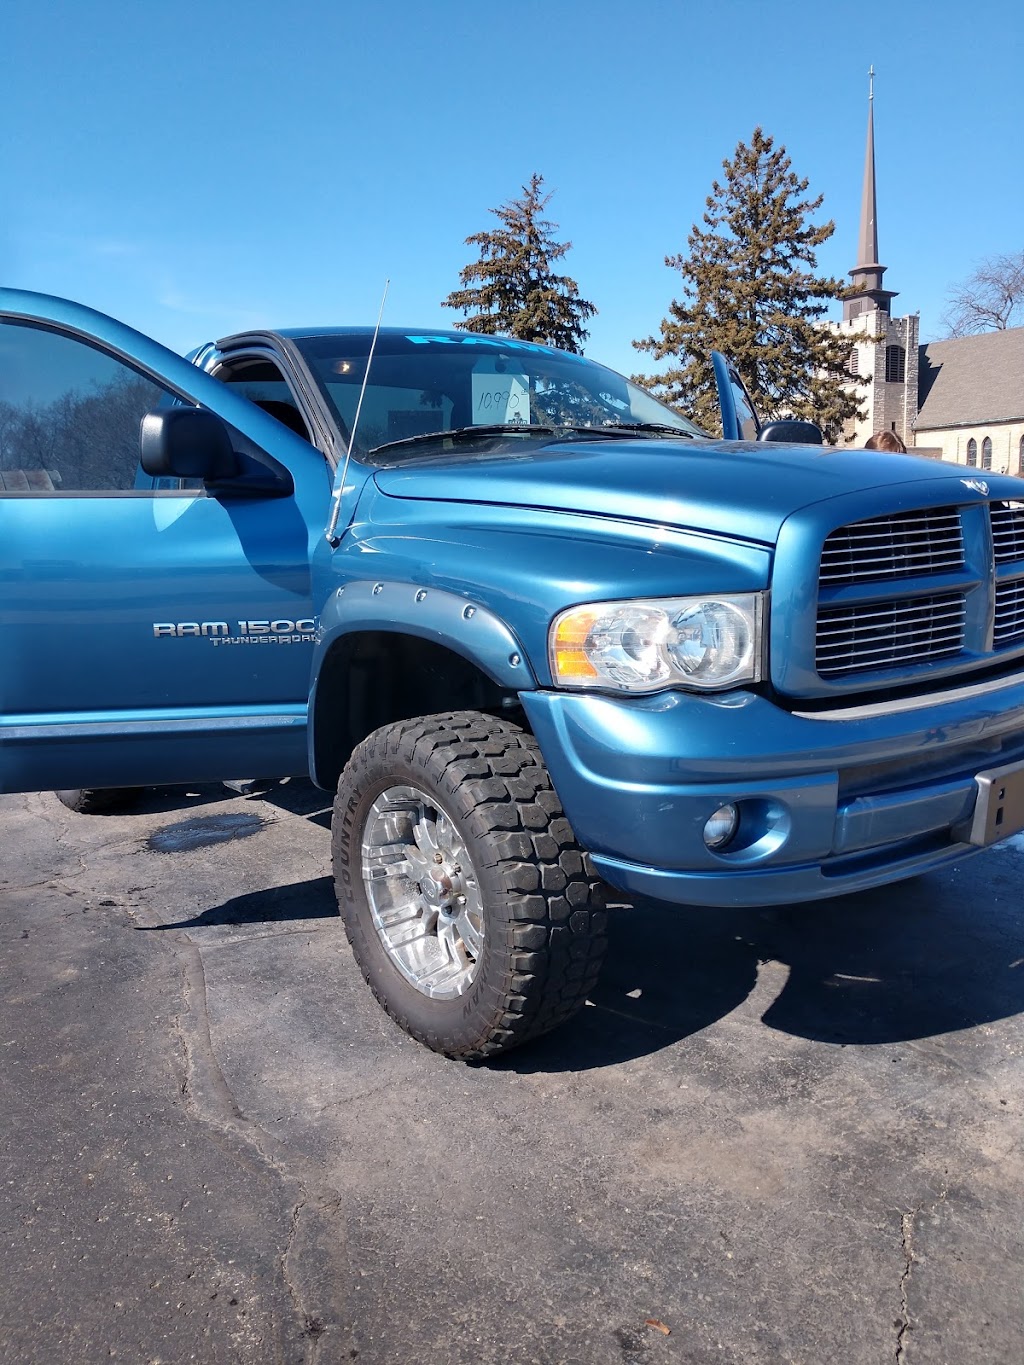 Used Car Factory | 1448 Center Ave, Janesville, WI 53546, USA | Phone: (608) 758-3100